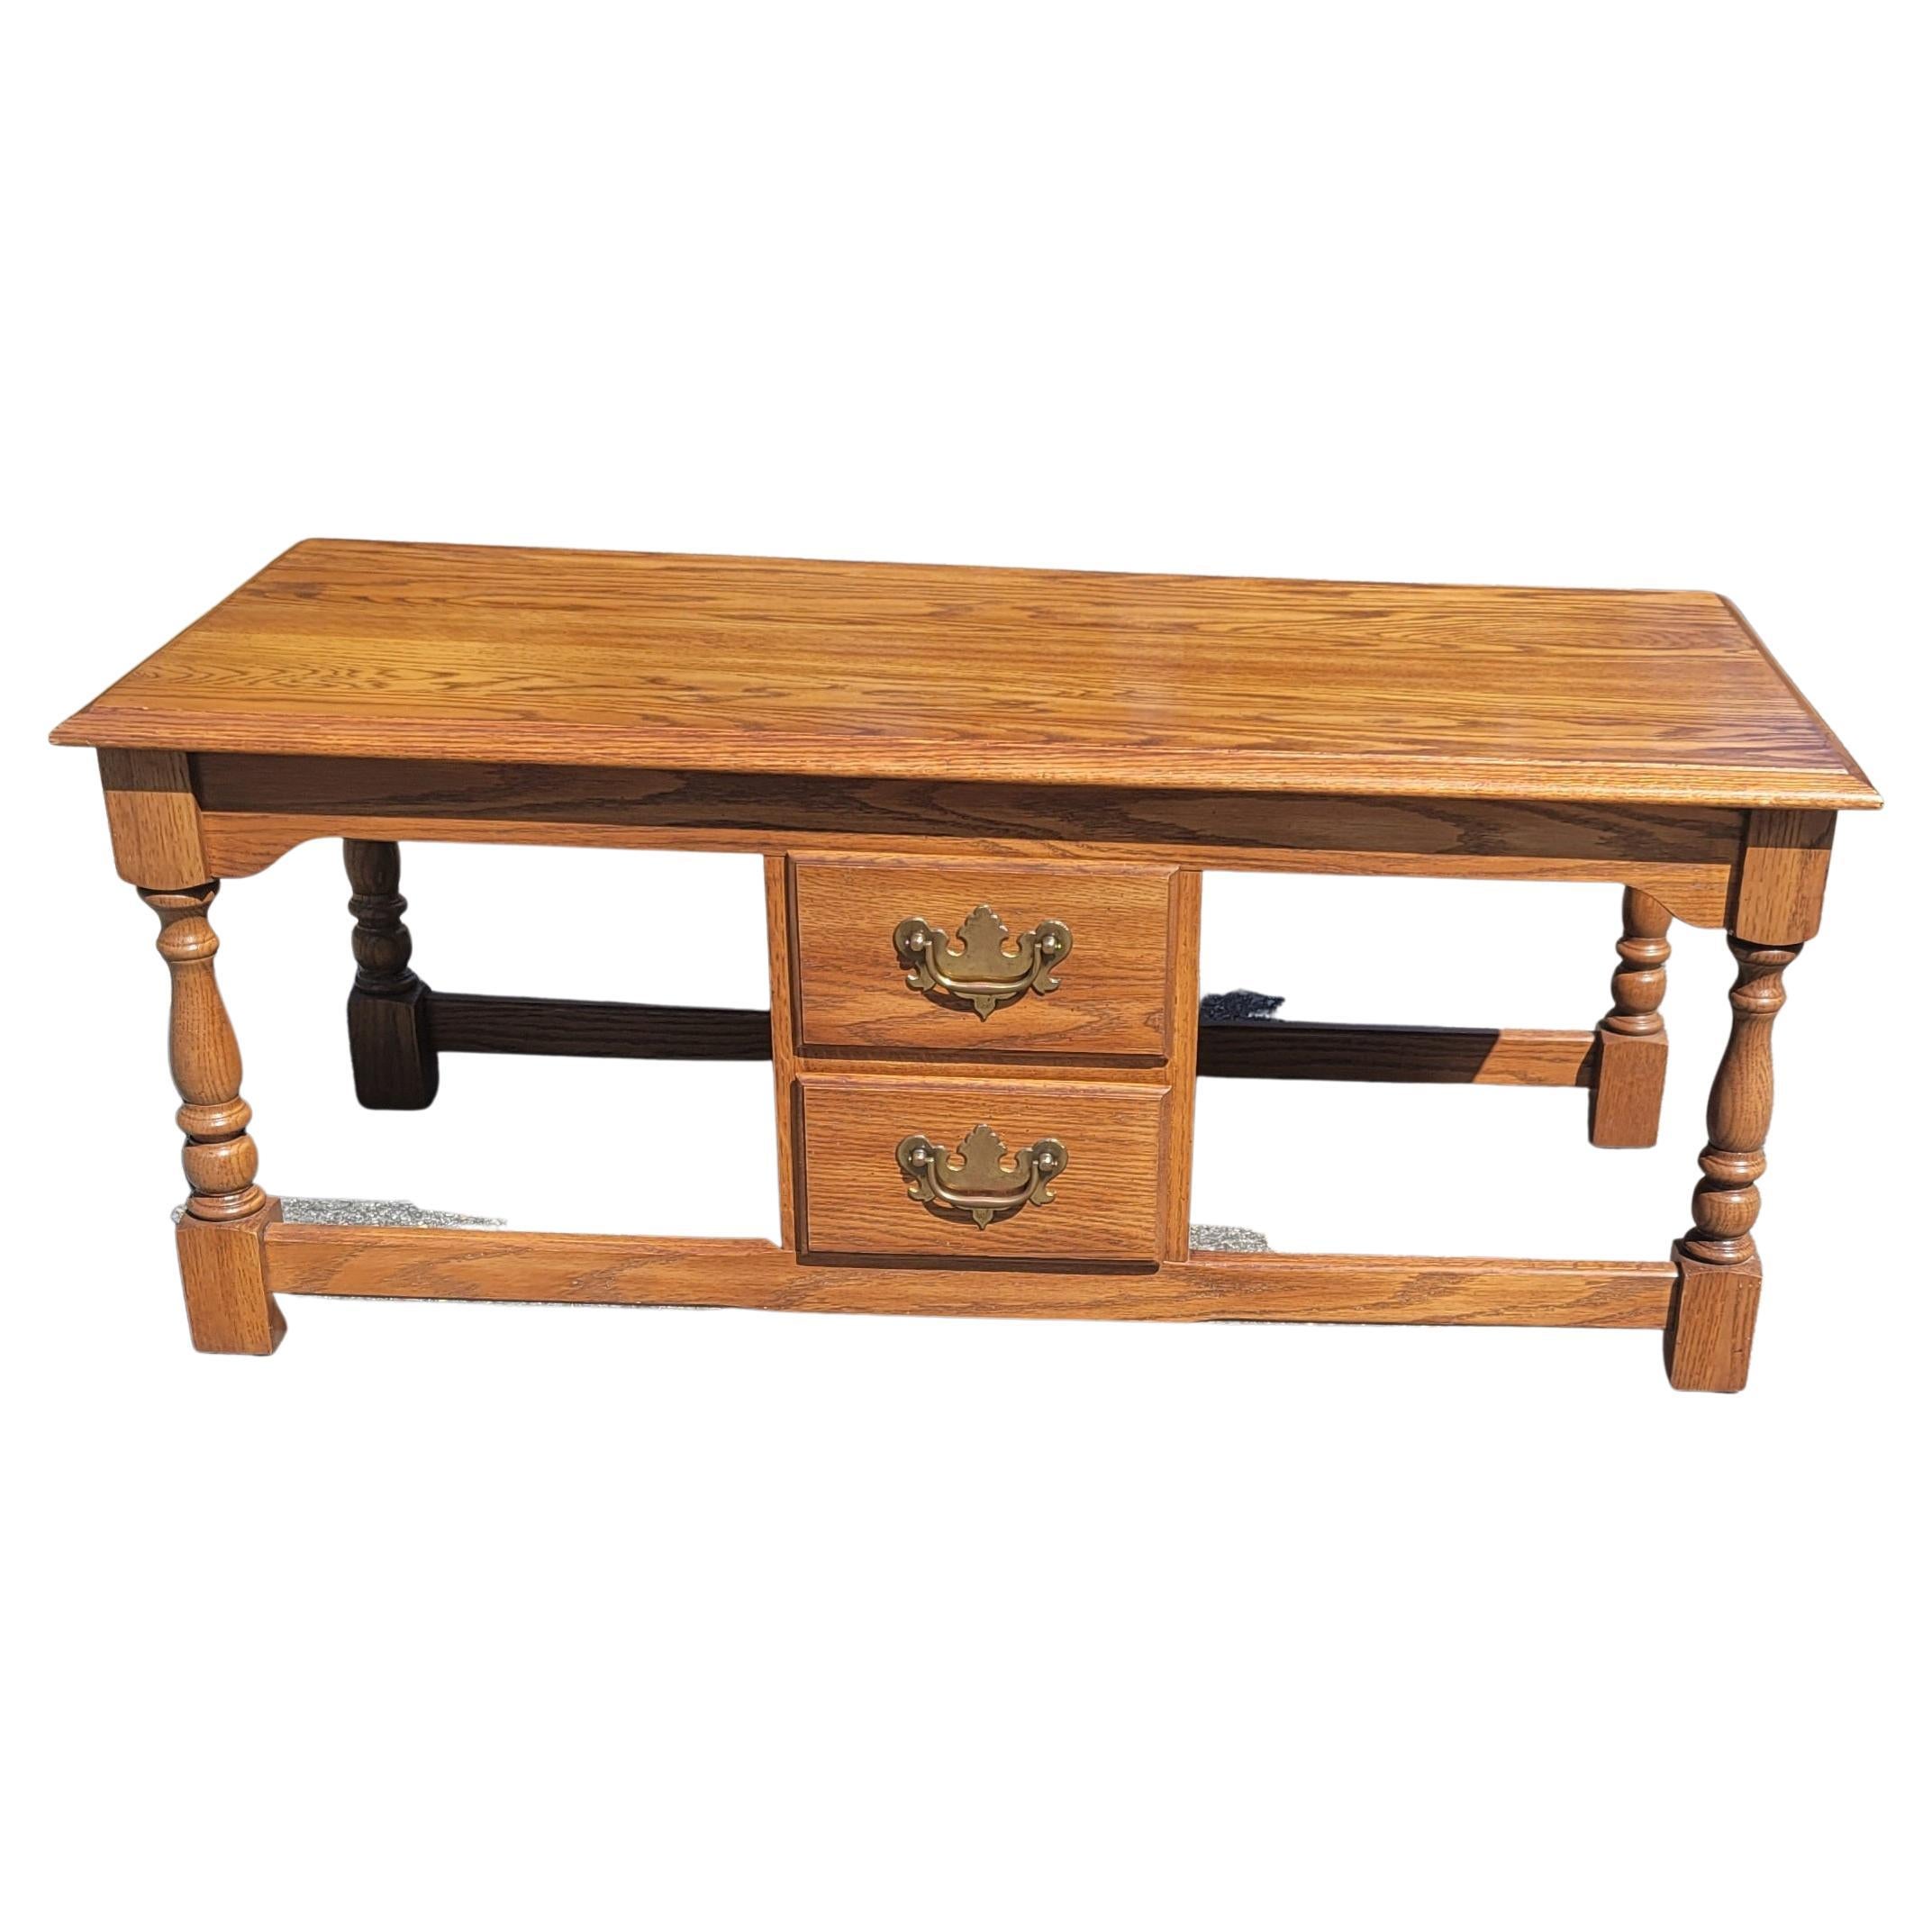 Pennsylvania House two-drawer solid oak petite coffee table or cocktail table in great condition. Feature two actual drawers on one side and two faux drawers on the other side. Measures 39.75